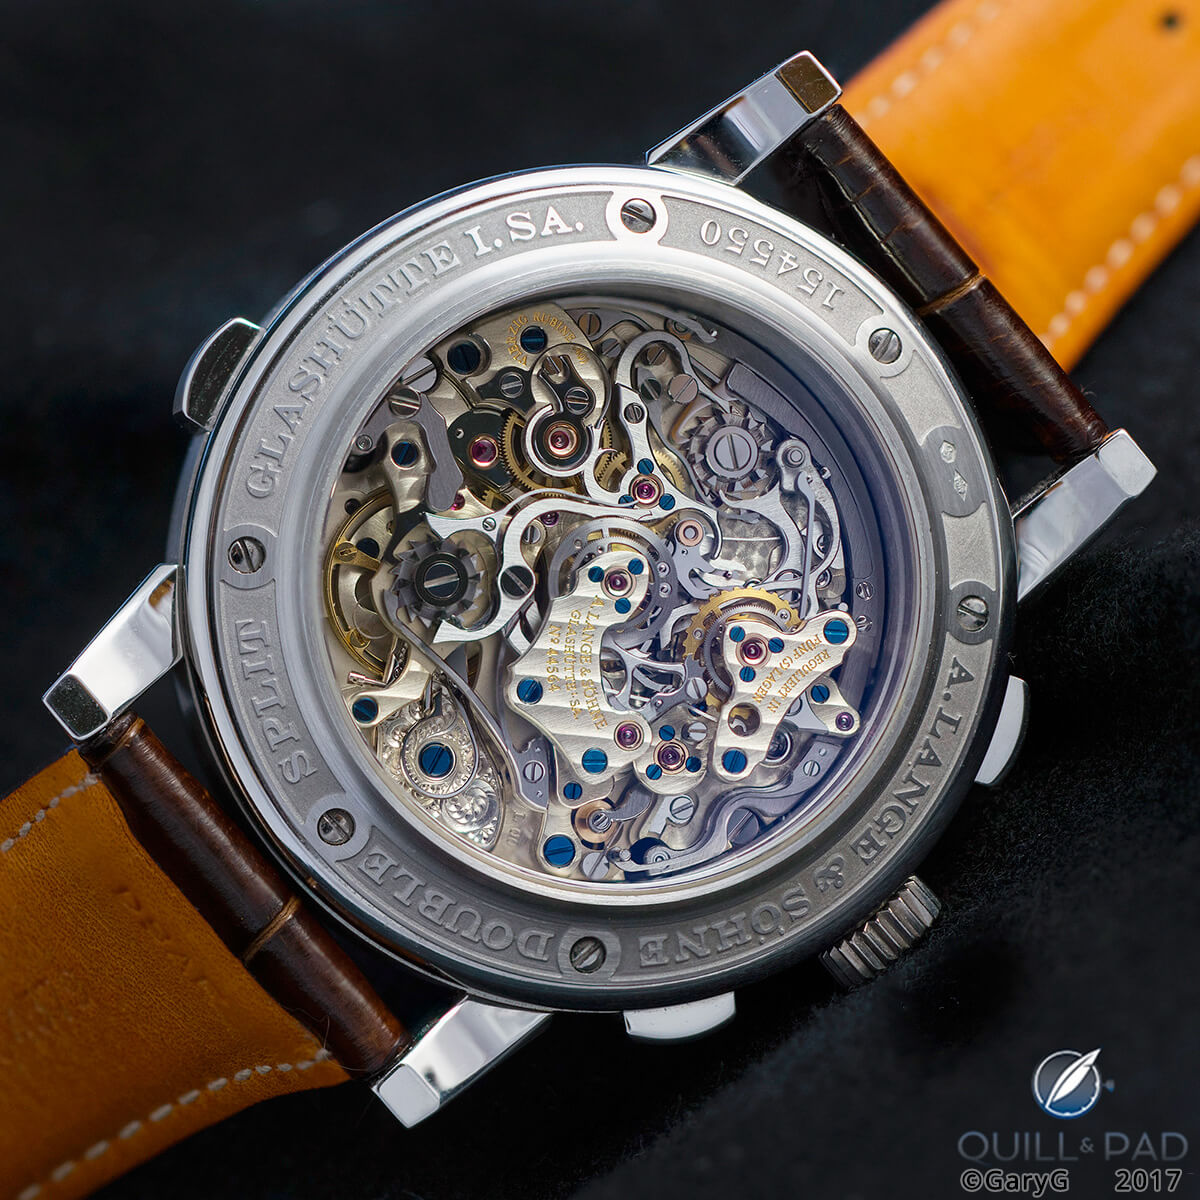 Is this A. Lange & Söhne Double Split movement the best of all?